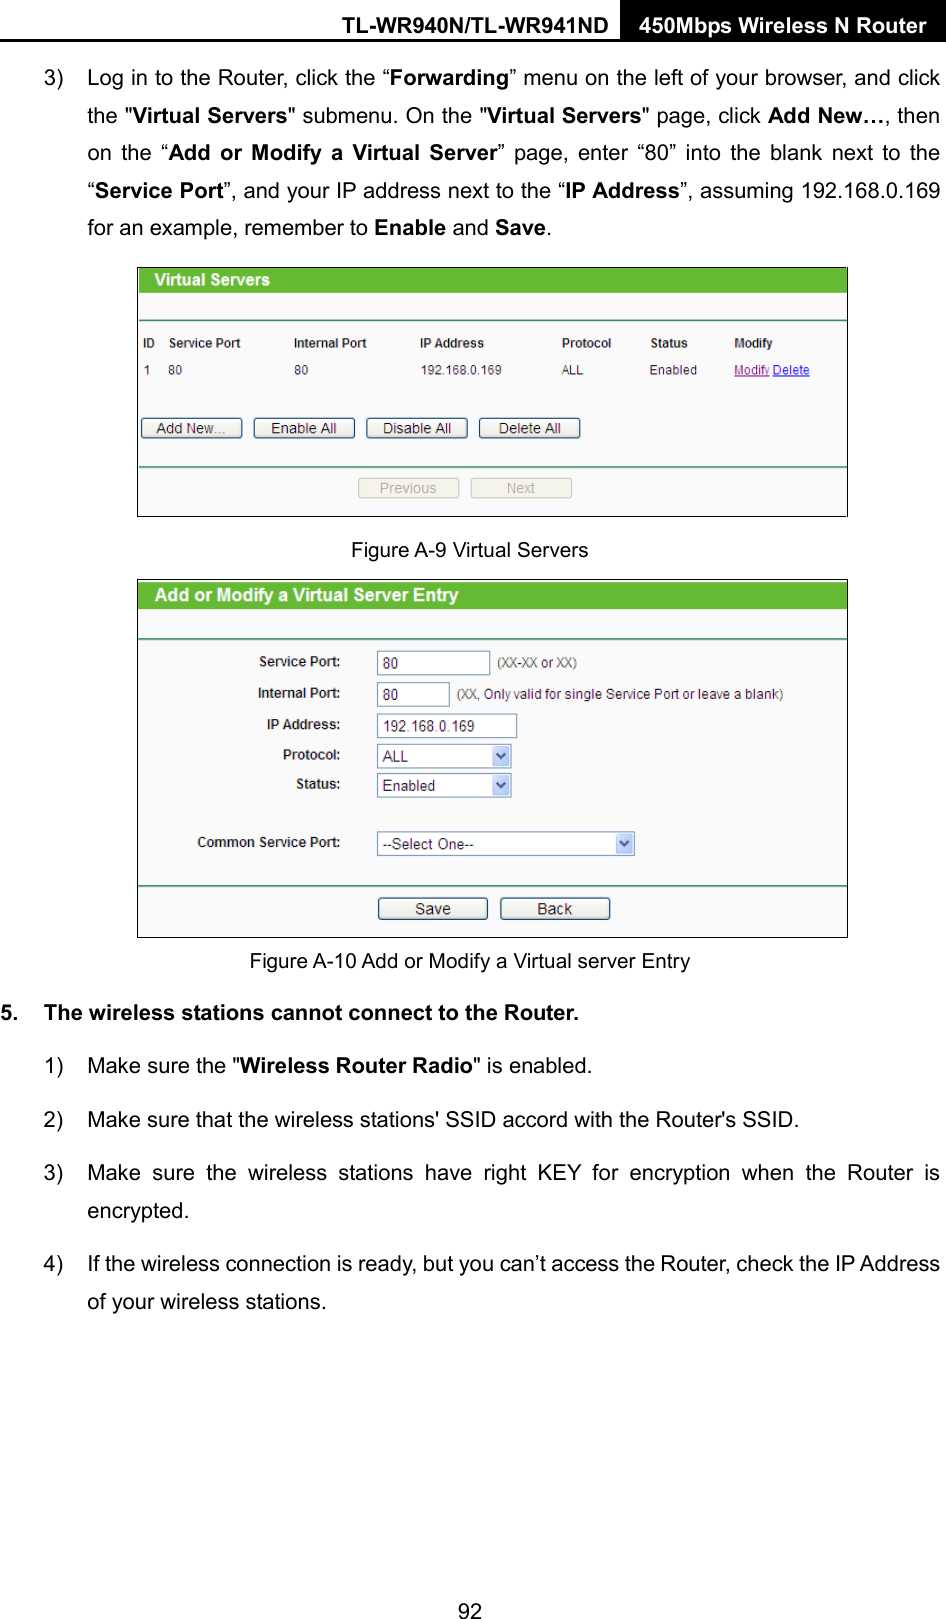 TL-WR940N/TL-WR941ND 450Mbps Wireless N Router  3) Log in to the Router, click the “Forwarding” menu on the left of your browser, and click the &quot;Virtual Servers&quot; submenu. On the &quot;Virtual Servers&quot; page, click Add New…, then on the “Add or Modify a Virtual Server” page, enter “80” into the blank next to the “Service Port”, and your IP address next to the “IP Address”, assuming 192.168.0.169 for an example, remember to Enable and Save.  Figure A-9 Virtual Servers  Figure A-10 Add or Modify a Virtual server Entry 5. The wireless stations cannot connect to the Router. 1) Make sure the &quot;Wireless Router Radio&quot; is enabled. 2) Make sure that the wireless stations&apos; SSID accord with the Router&apos;s SSID. 3) Make sure the wireless stations have right KEY for encryption when the Router is encrypted. 4) If the wireless connection is ready, but you can’t access the Router, check the IP Address of your wireless stations. 92 